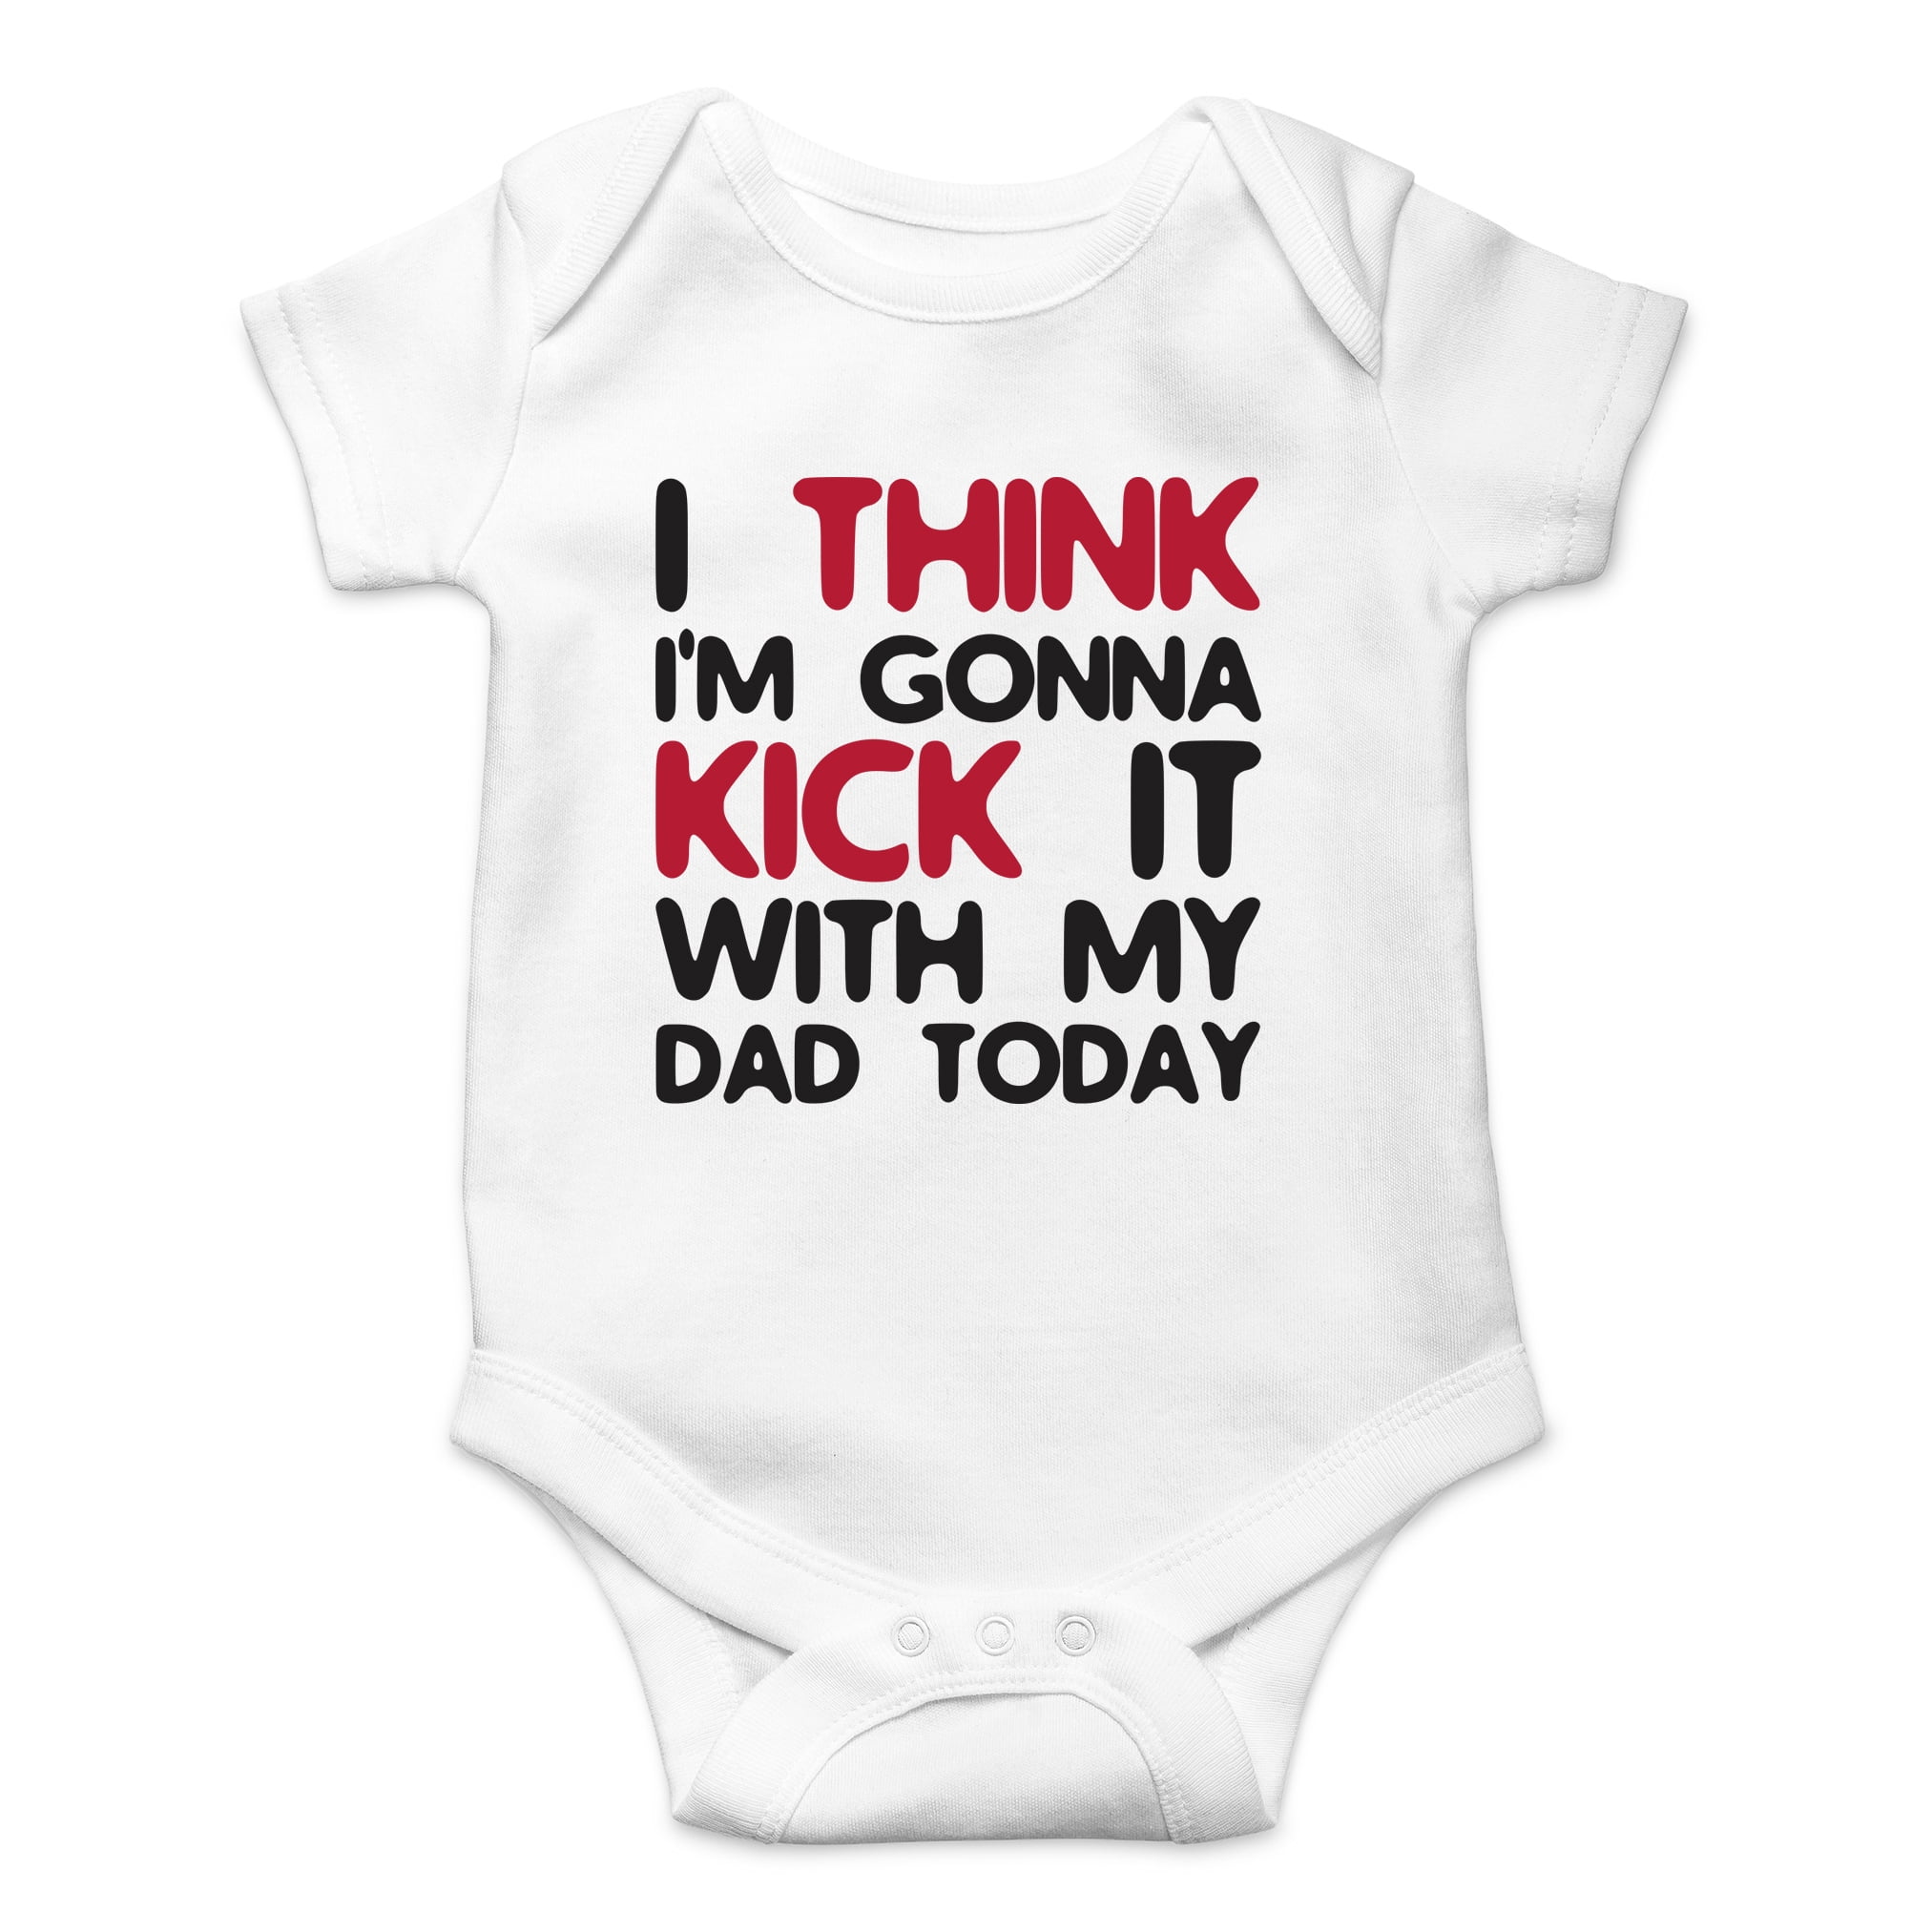 Parody Funny Cute Novelty Infant One-Piece Baby Bodysuit Crazy Bros Tees Ice Ice Baby 